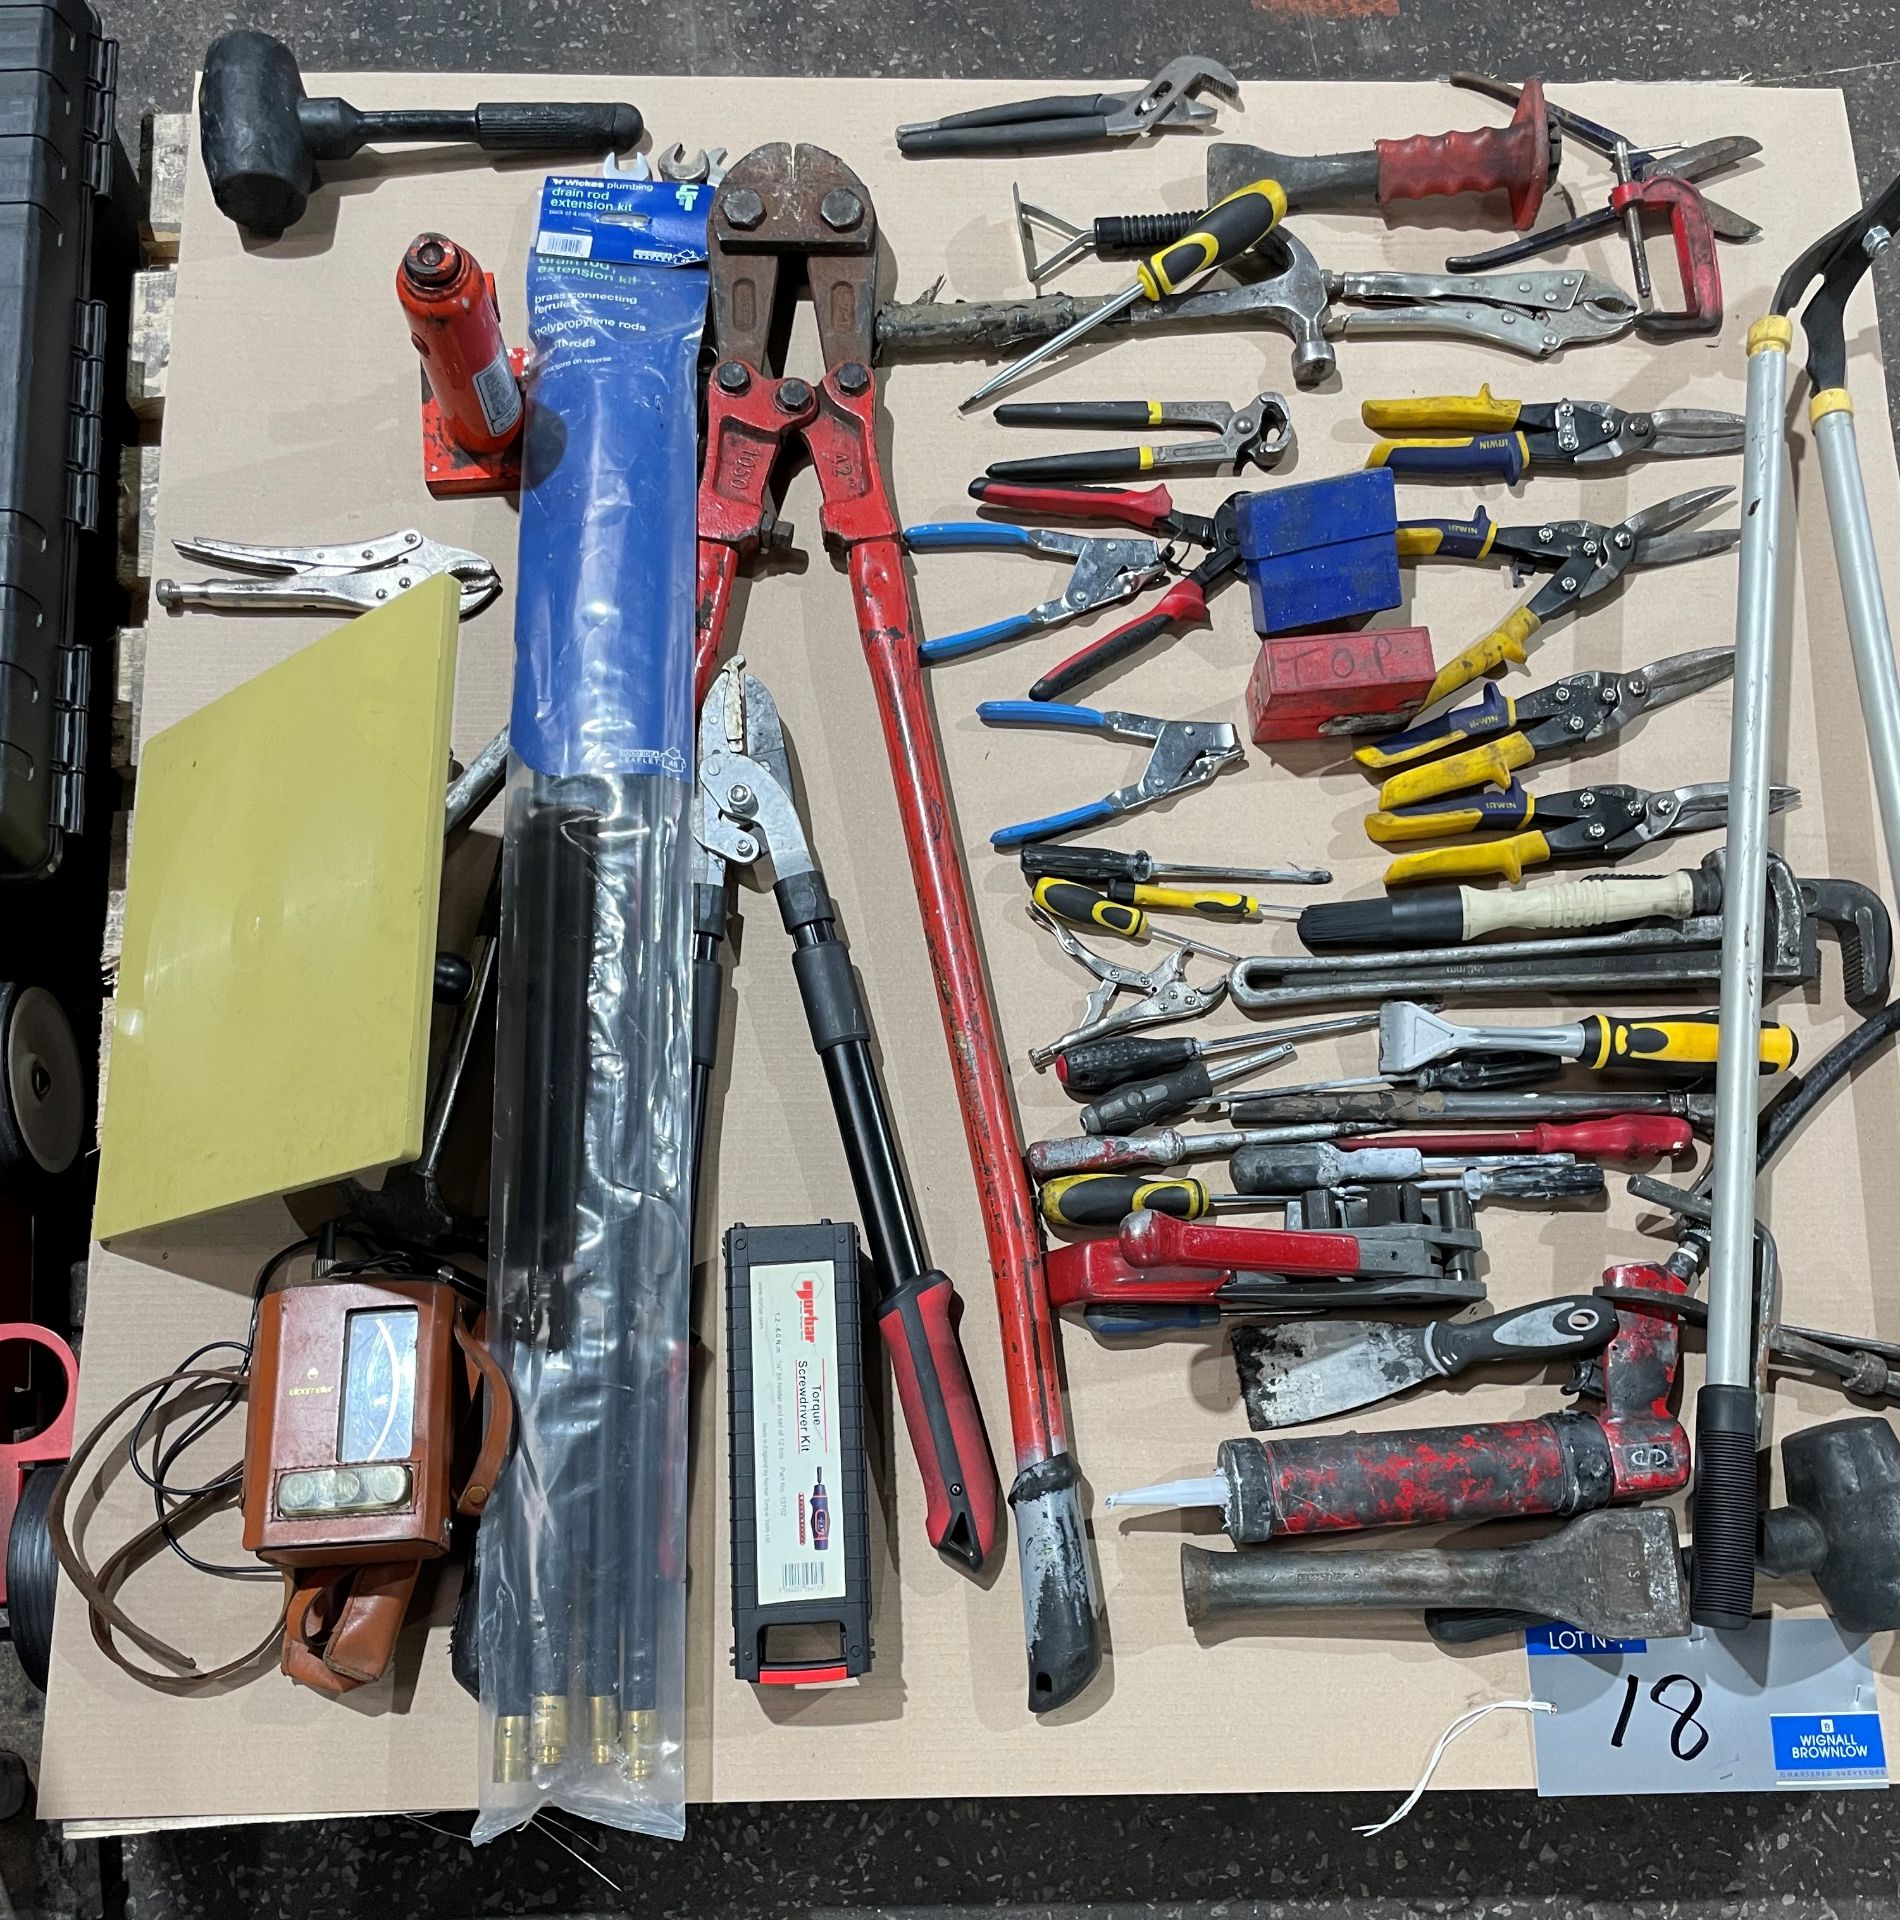 A Quantity of Hand Tools and Equipment including Bolt Cutters, Hedge Croppers, Draining Rods, Line